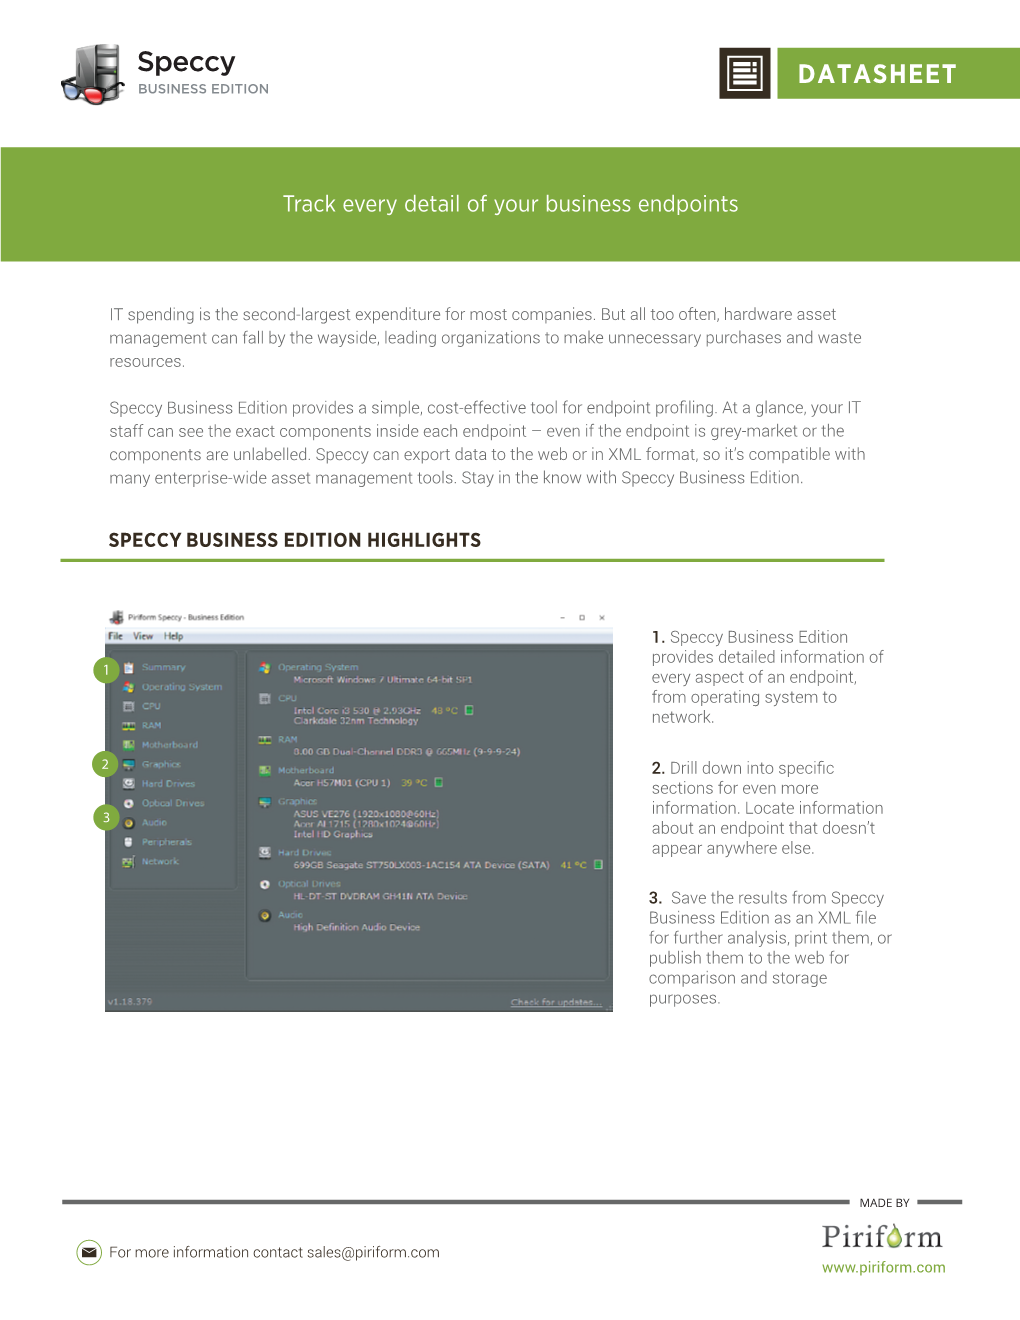 Speccy Business Edition Provides a Simple, Cost-Effective Tool for Endpoint Proﬁling